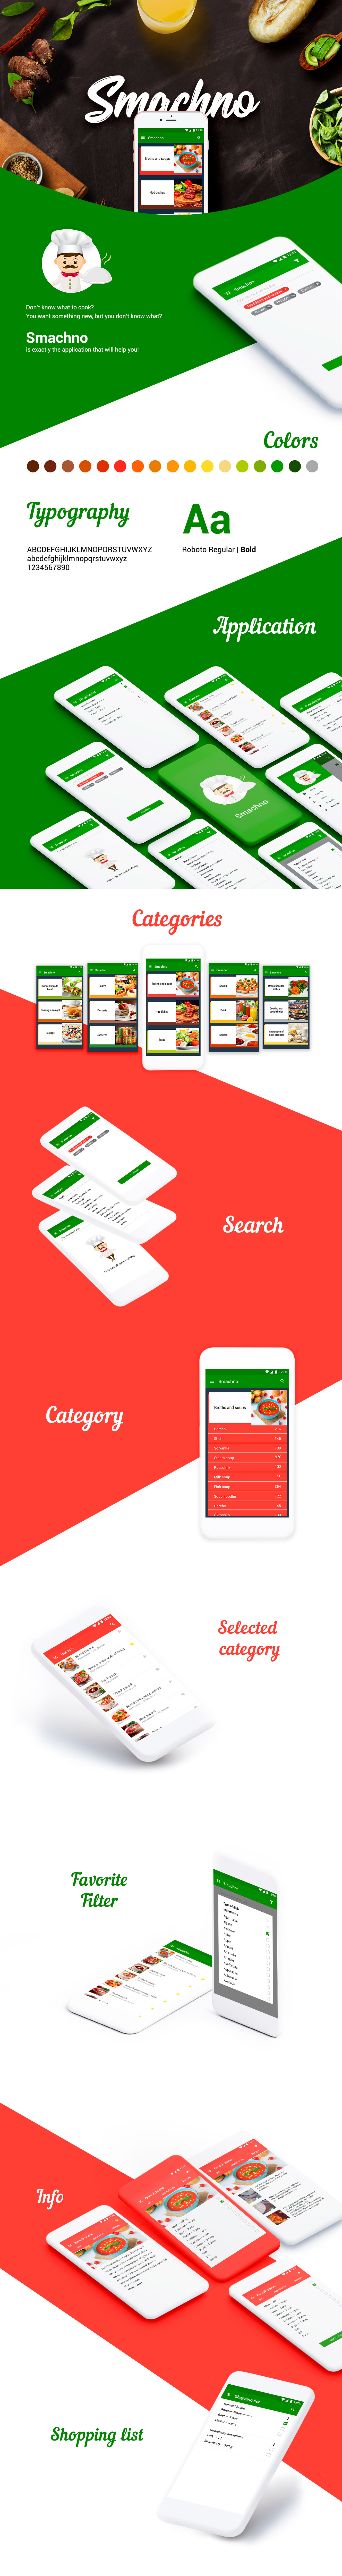 cooking Cook Book Mobile Application UI/UX android ios ui design UX design user interface user experience